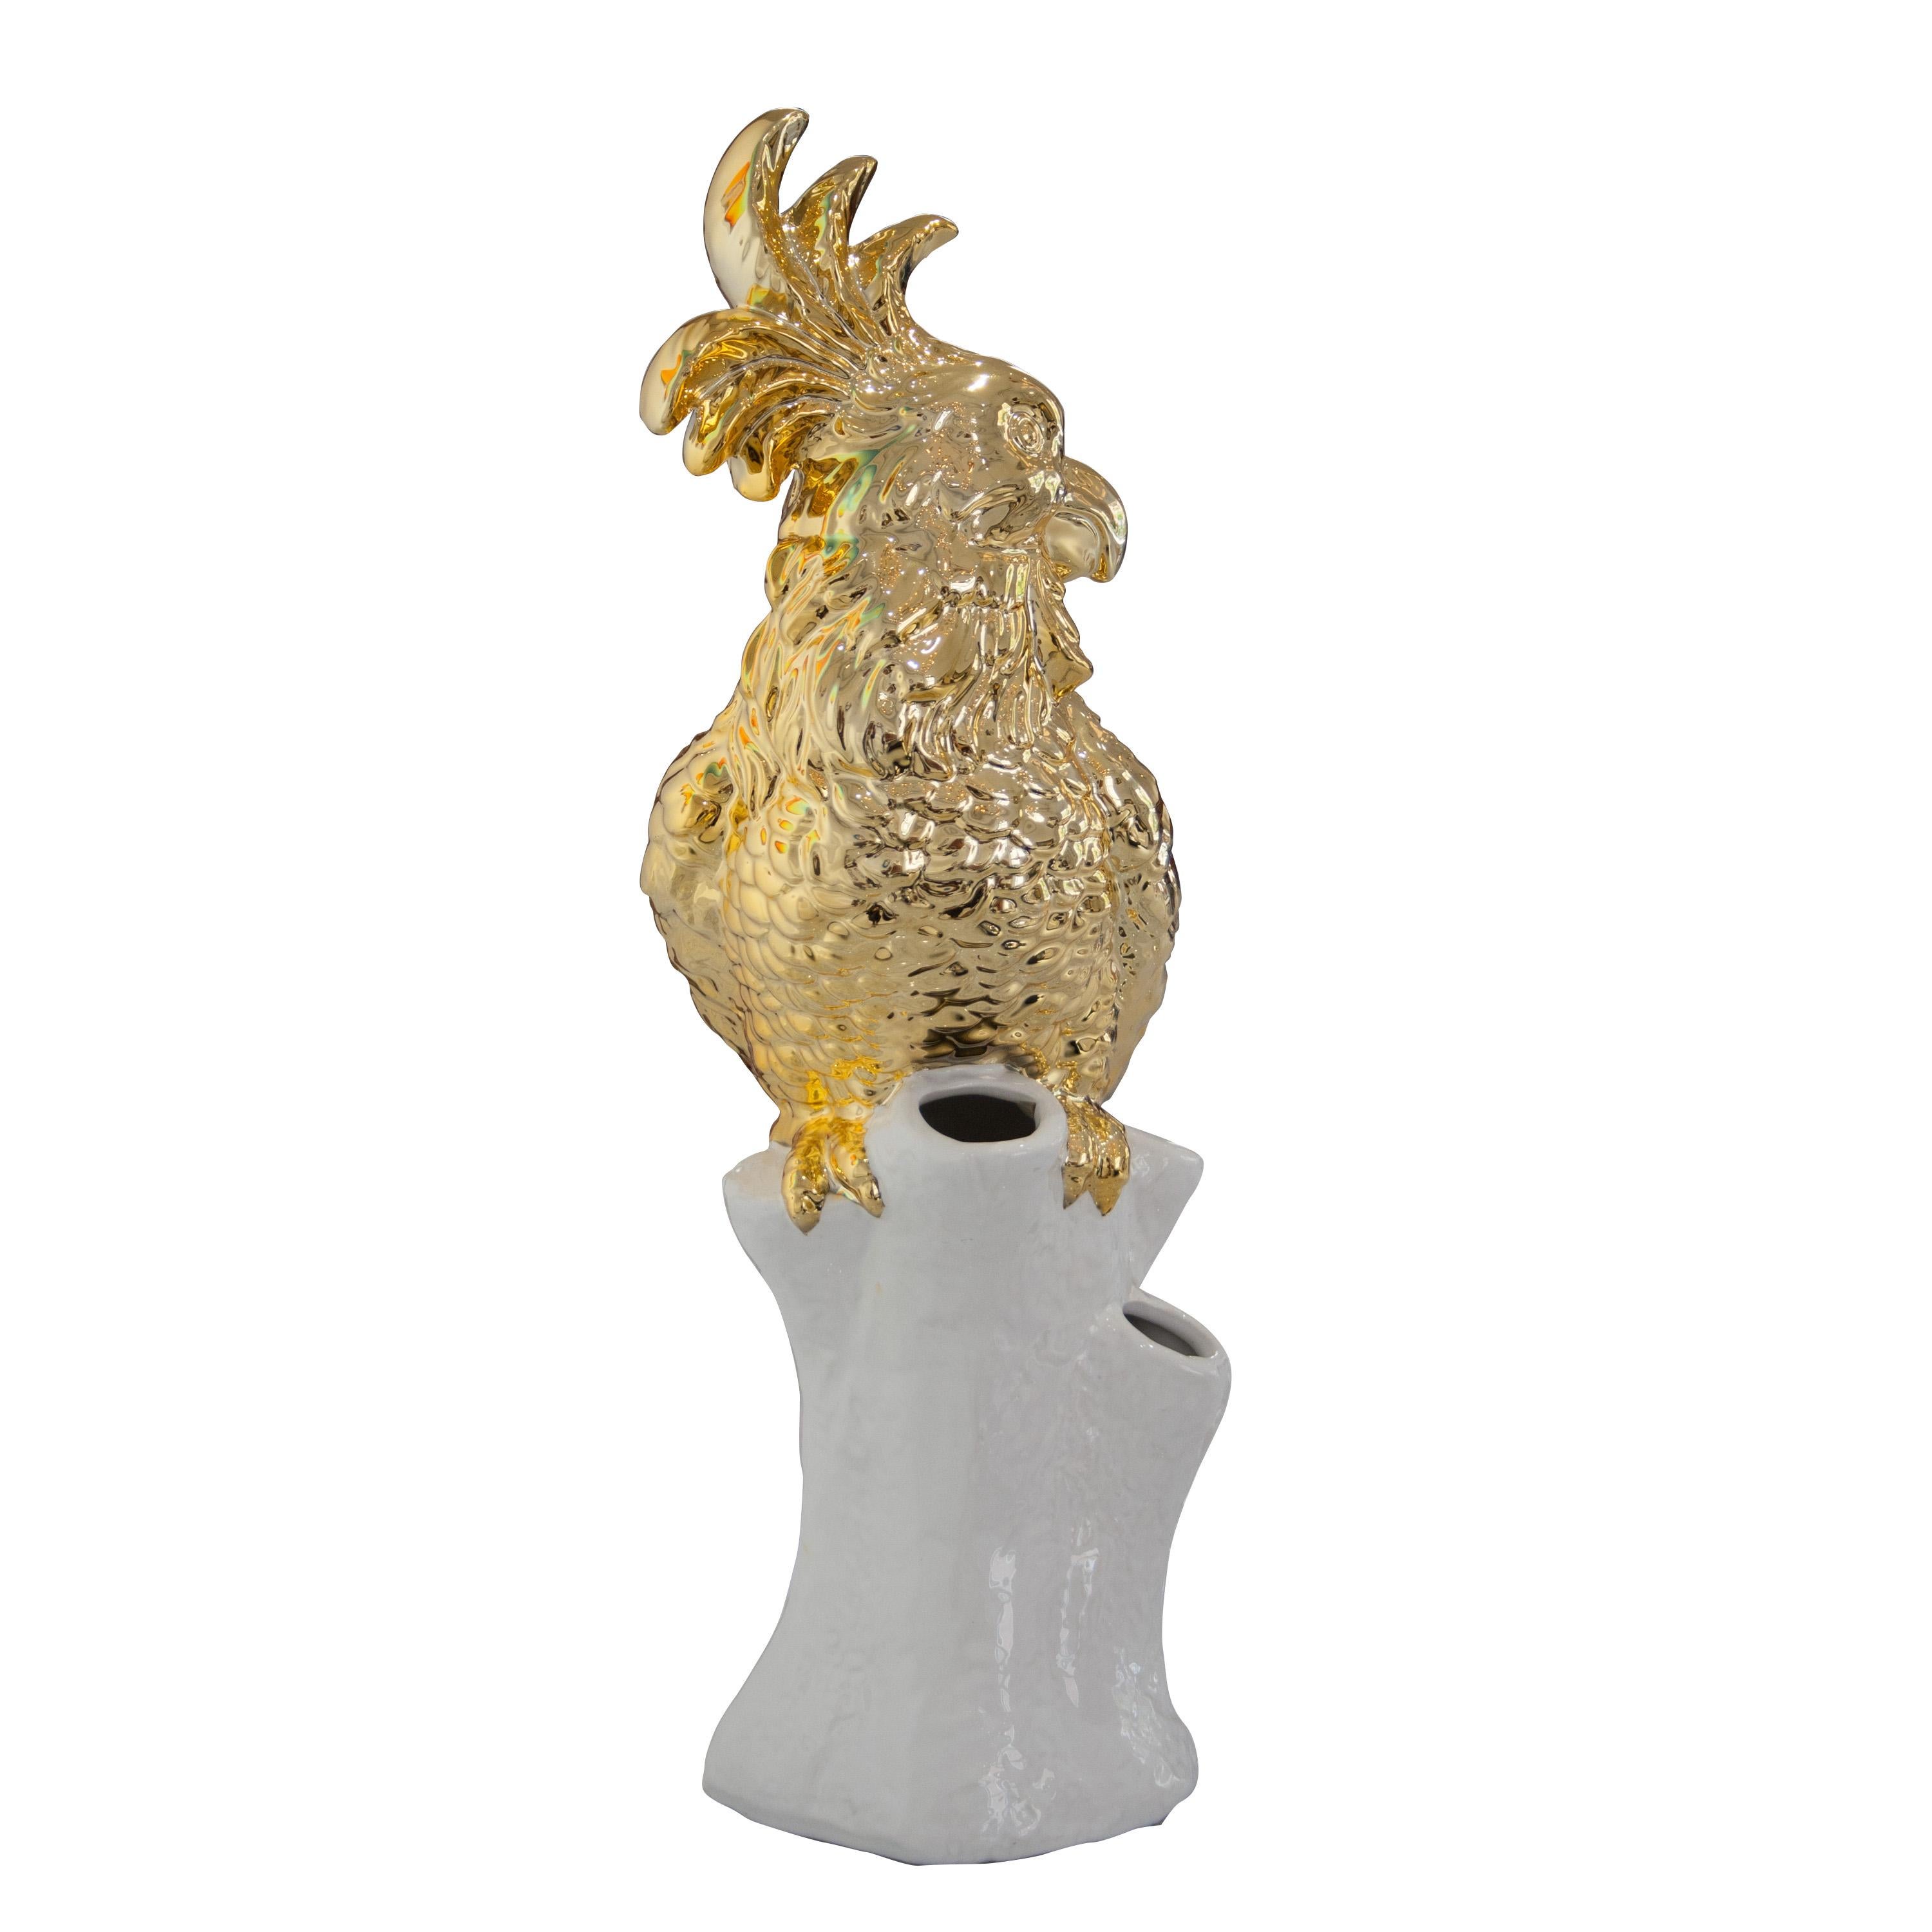 Ceramic vase in the shape of a cockatoo in white and gold finish. Three holes for flowers.